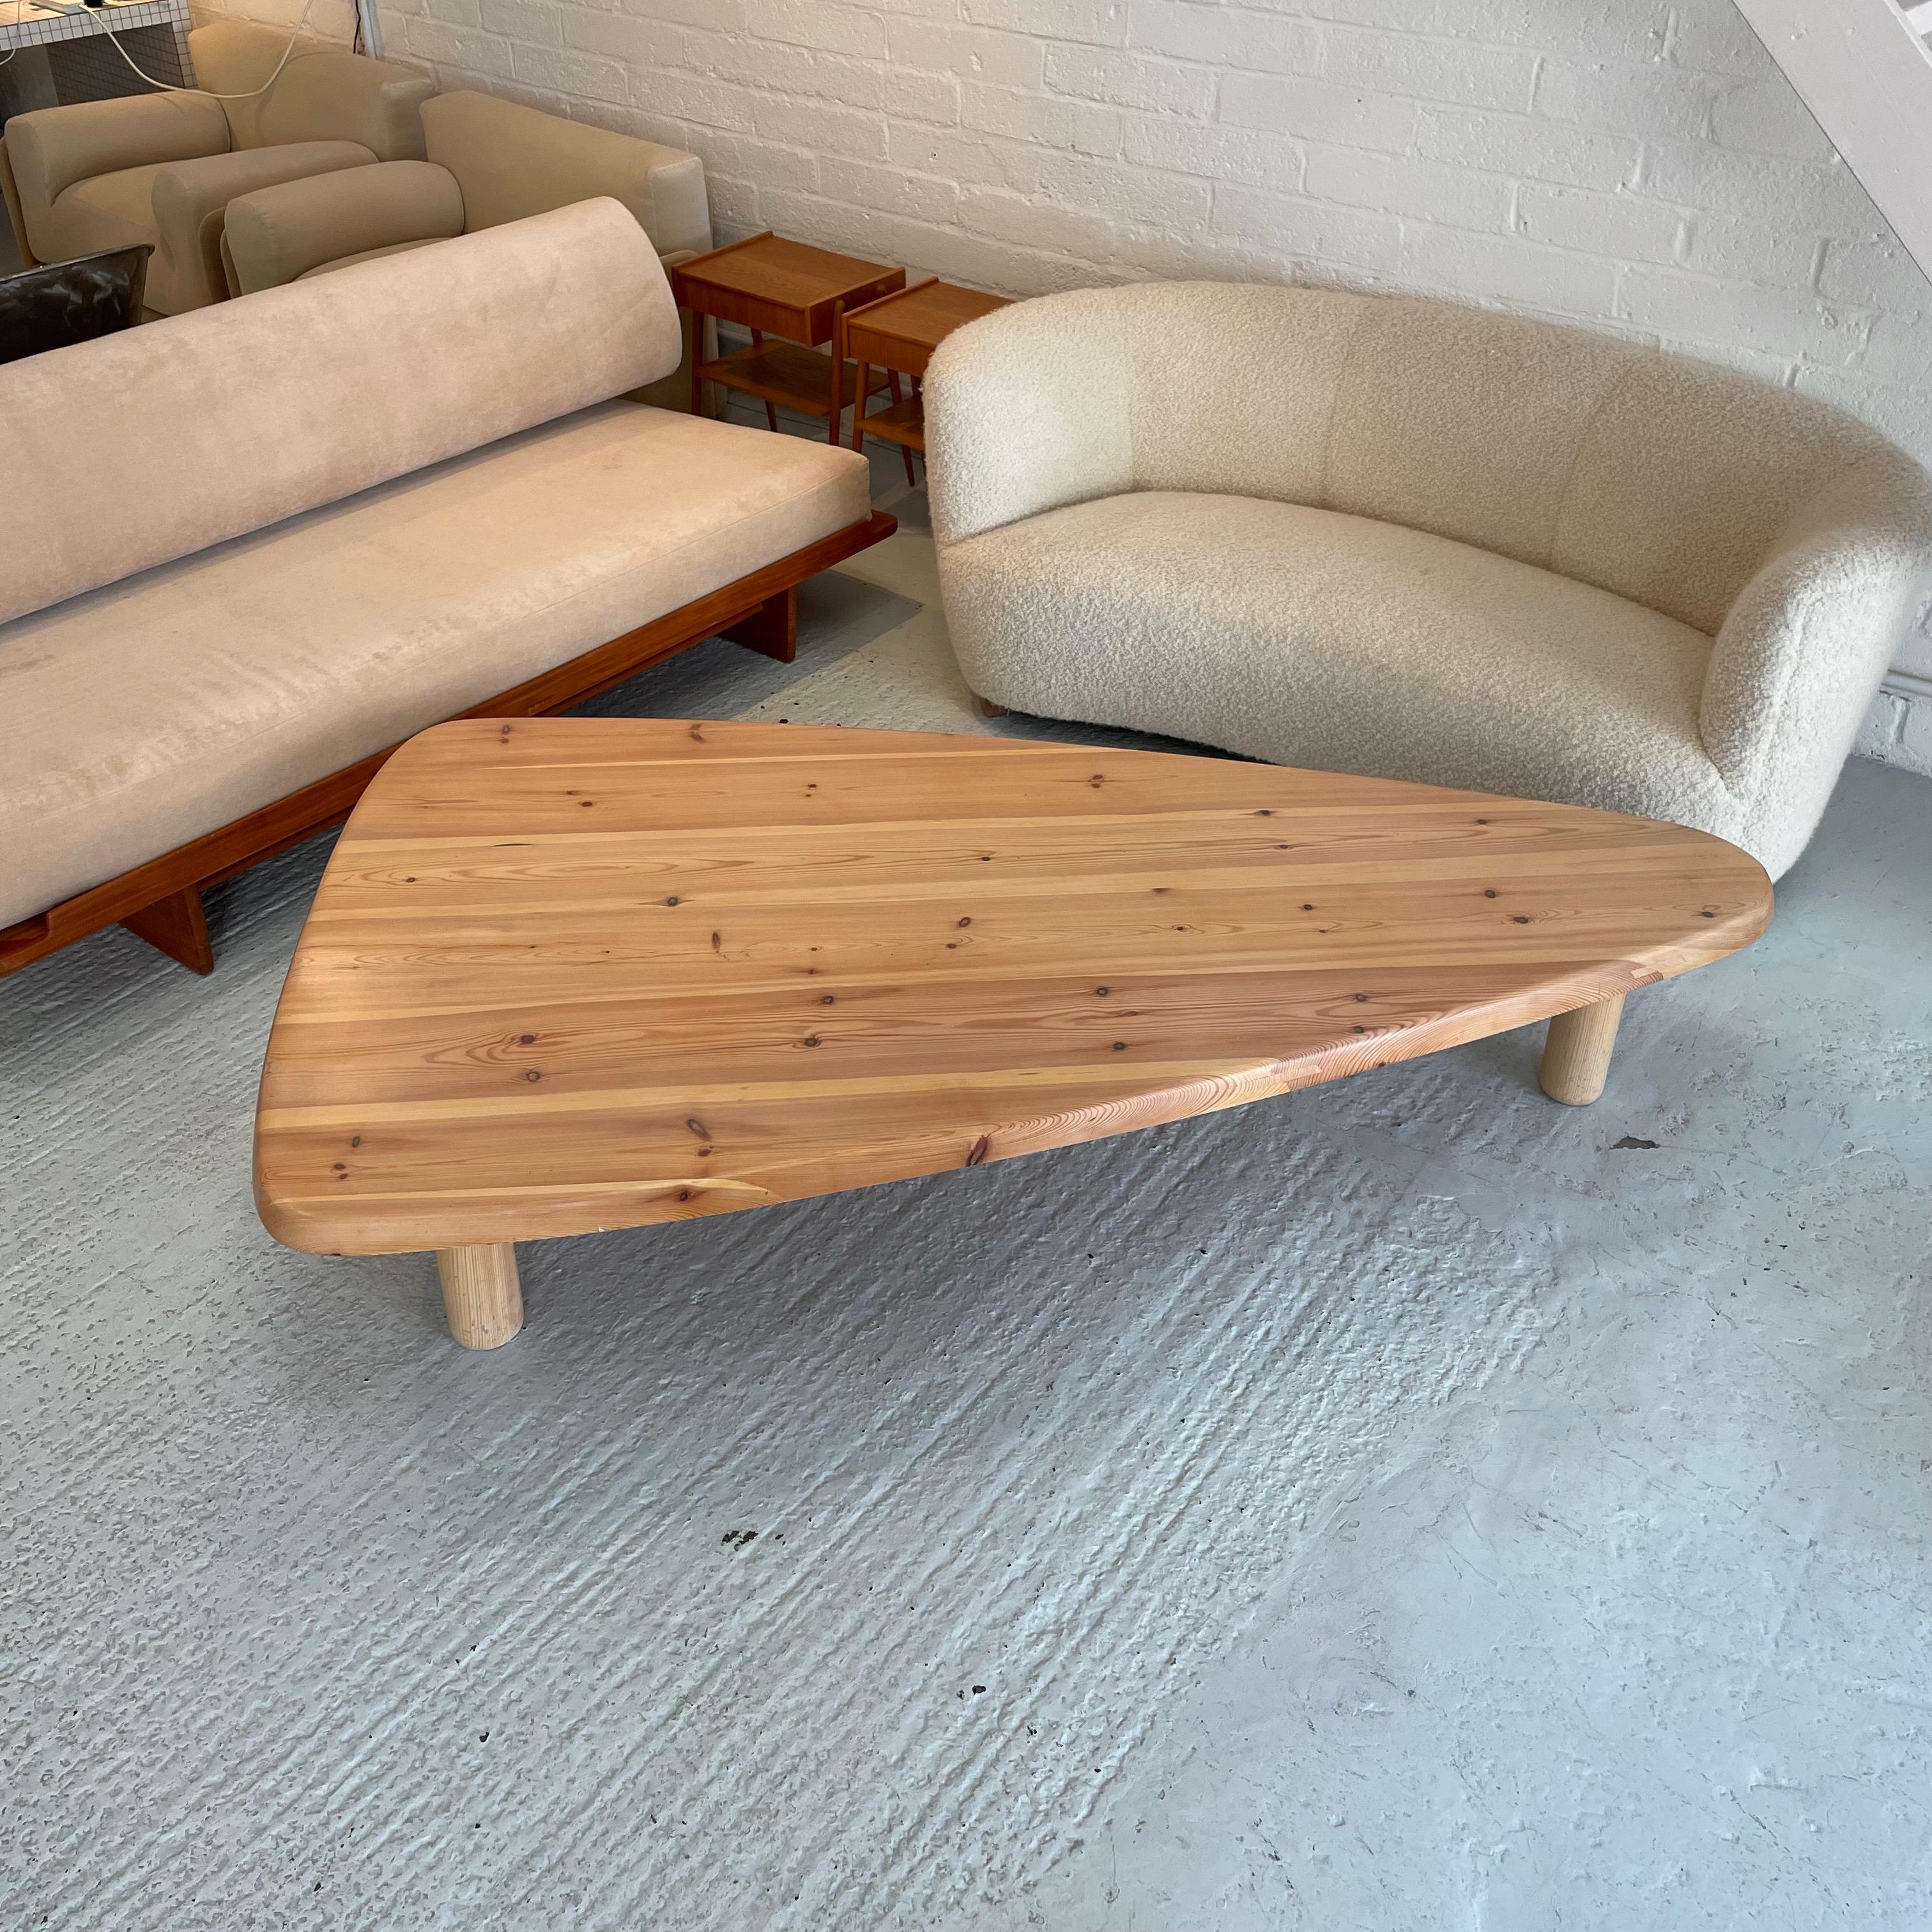 Height: 40cm
Width: 199cm
Depth: 112cm

Date: 1970s
Materials: Pine

Description: A large vintage wooden living room coffee table of French manufacture from the 1960s. The large low coffee table is made entirely of pine wood, with beautiful grains,